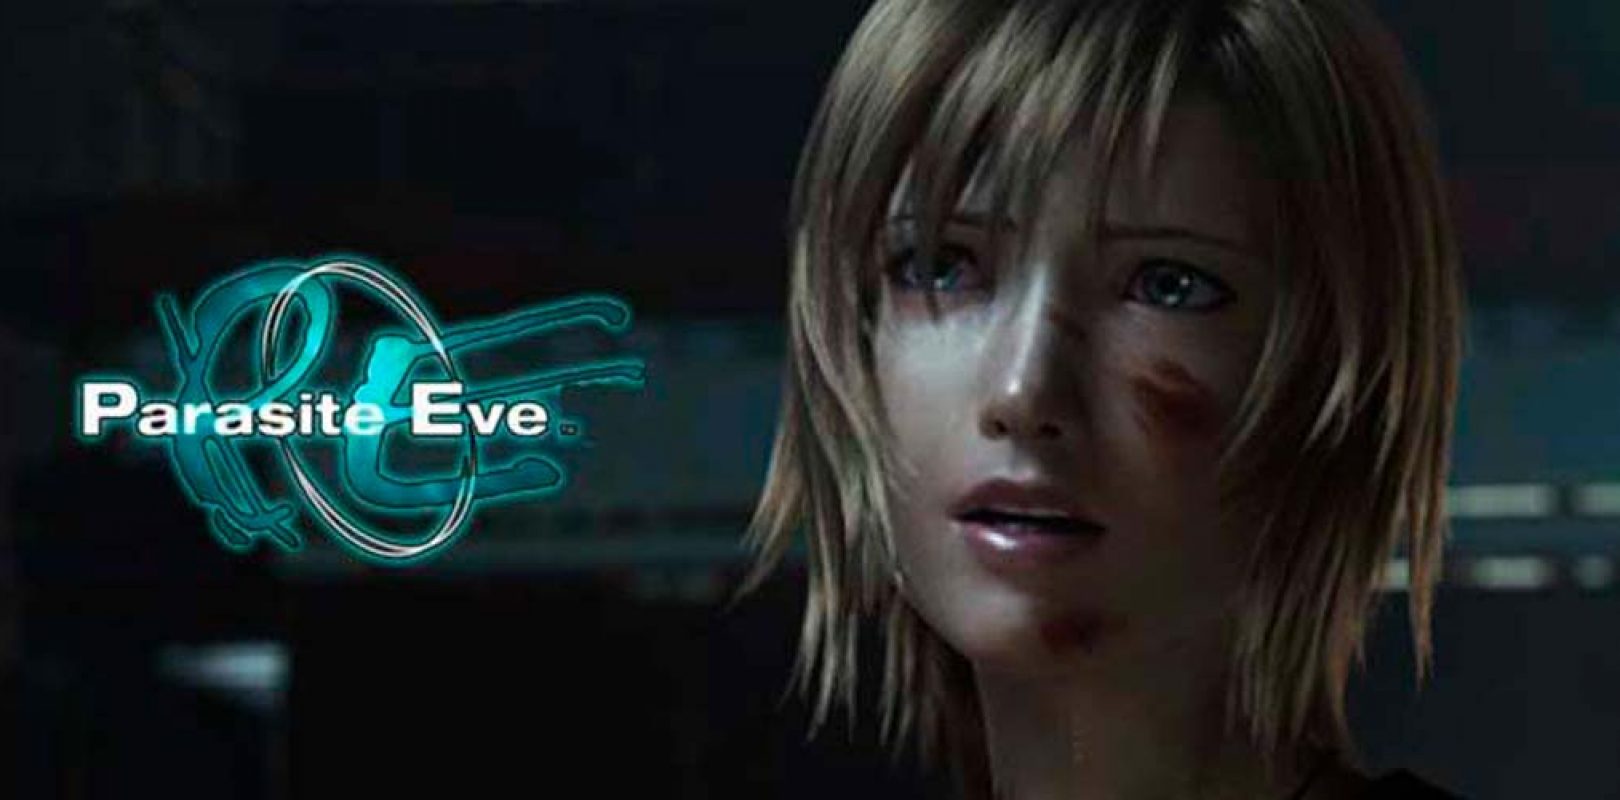 Parasite Eve gets trademarked by Square Enix in Europe - MSPoweruser